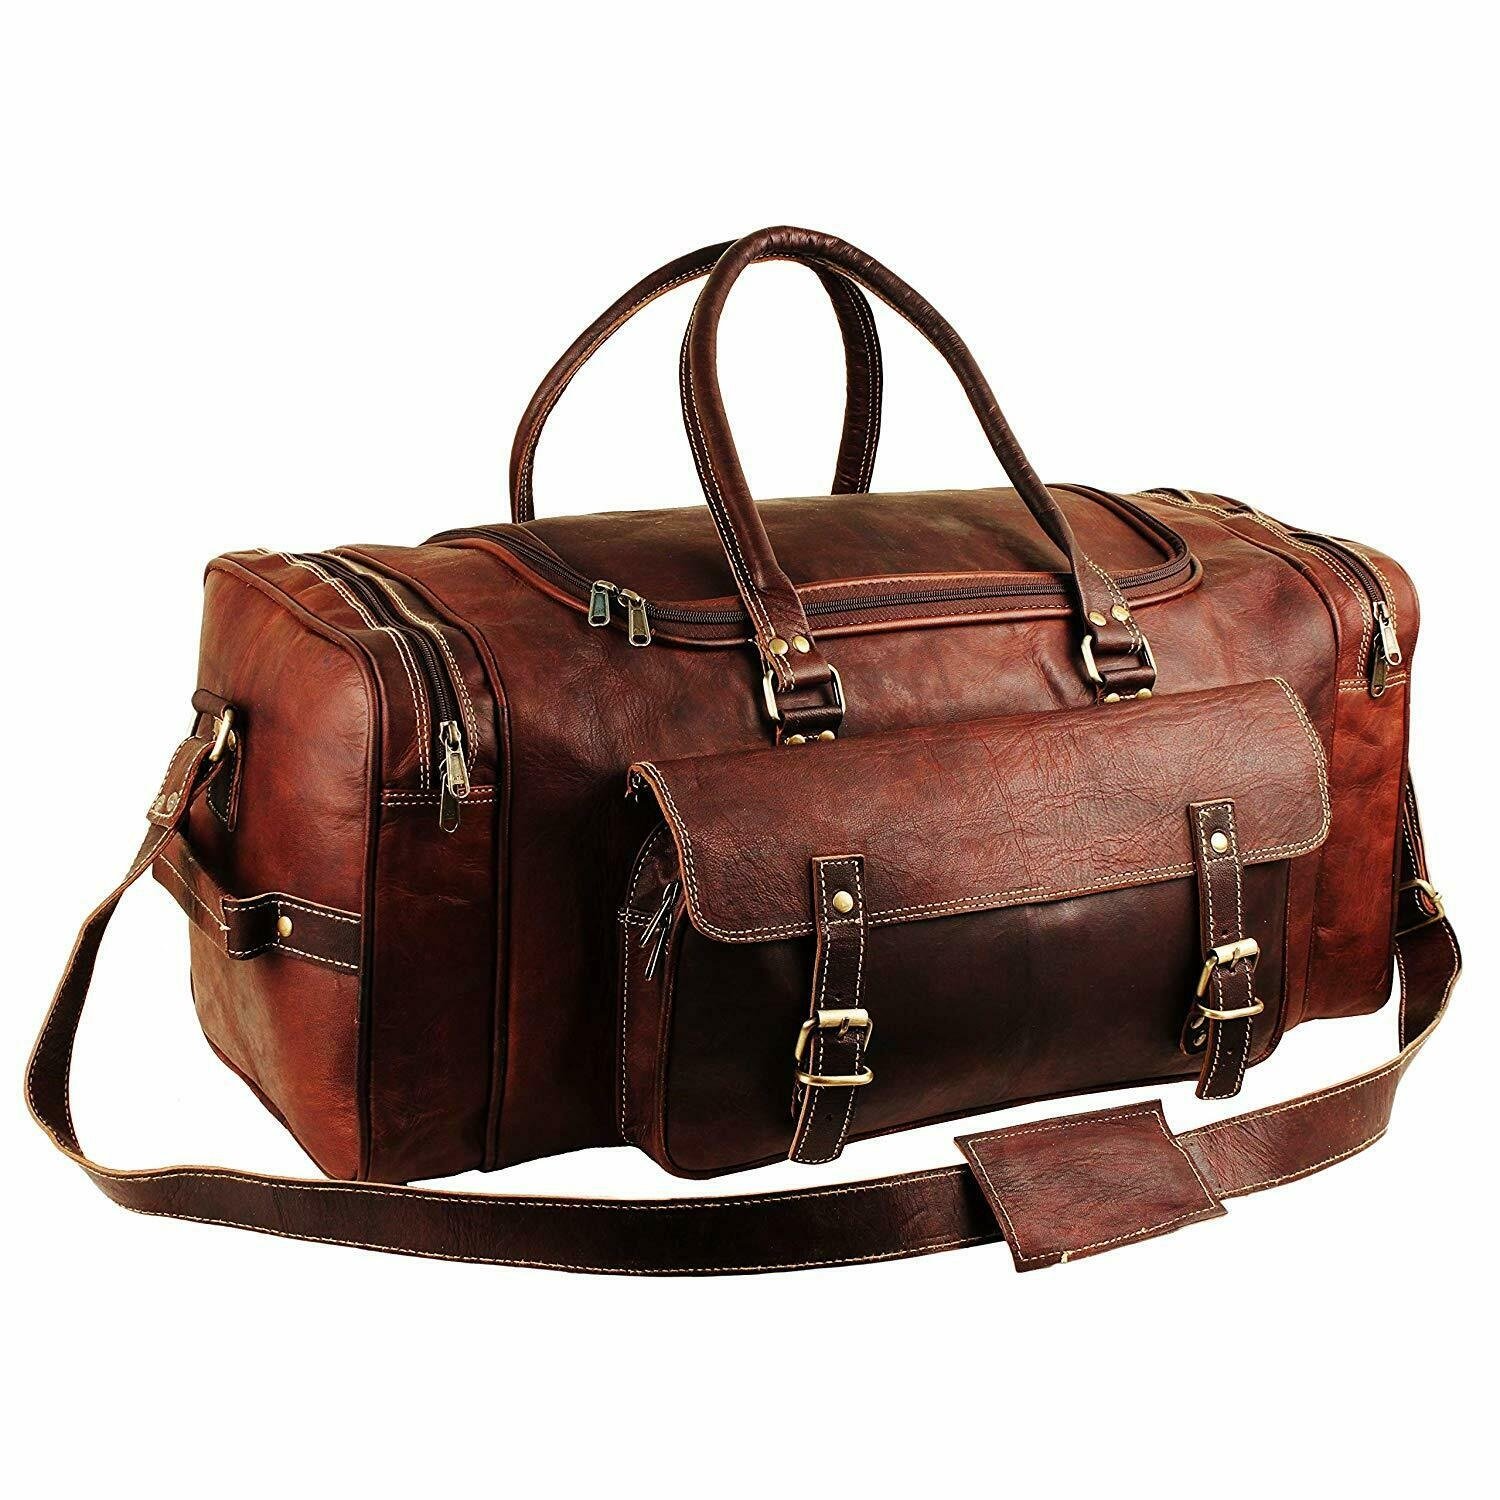 Classy Leather Bags - West Haven, CT, US, bags